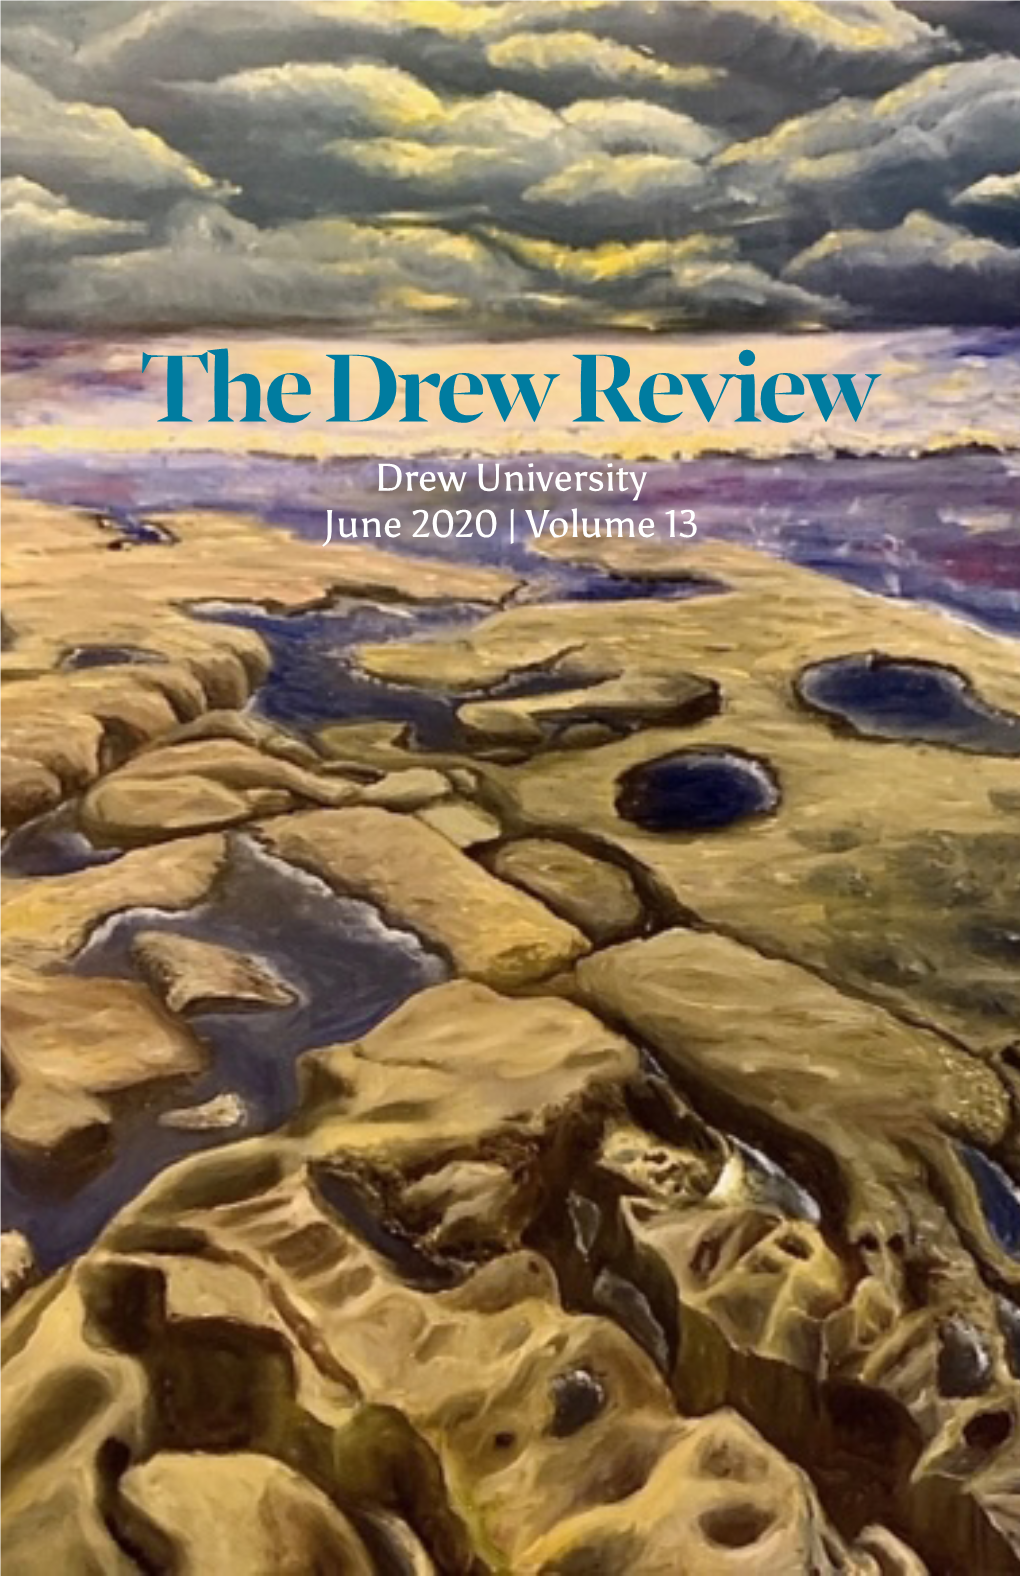 The Drew Review